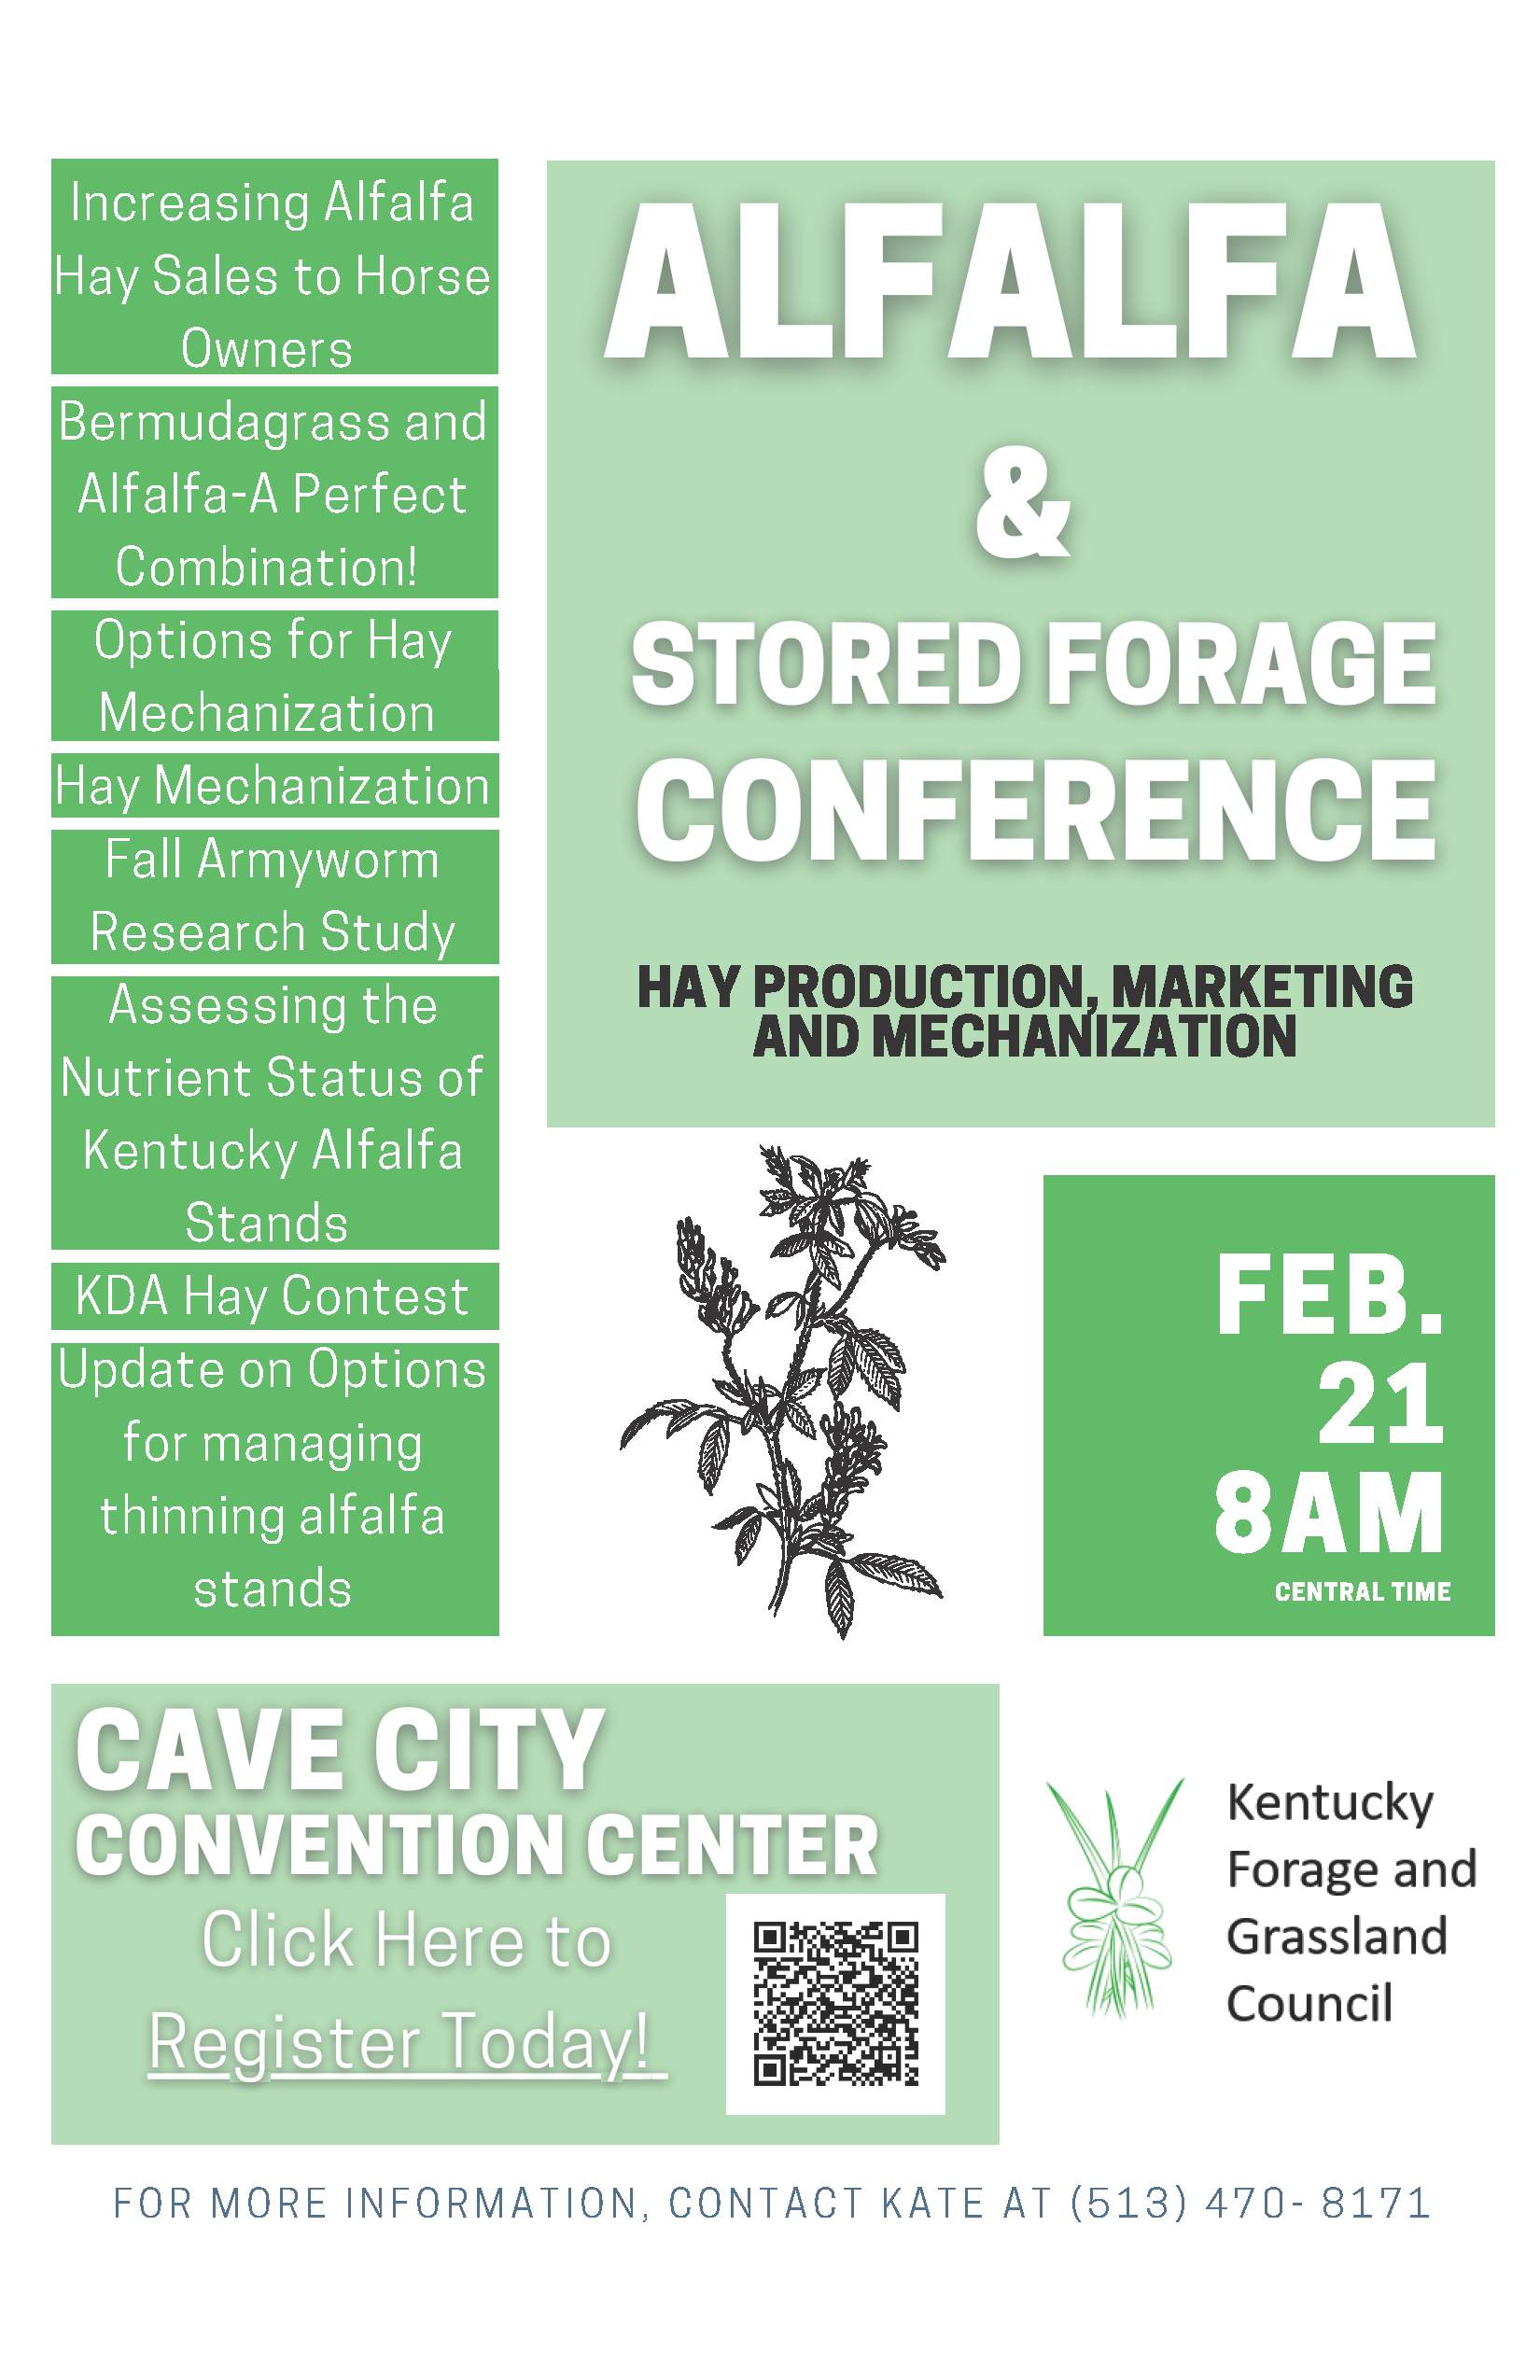 Alfalfa and Stored Forages Conference 